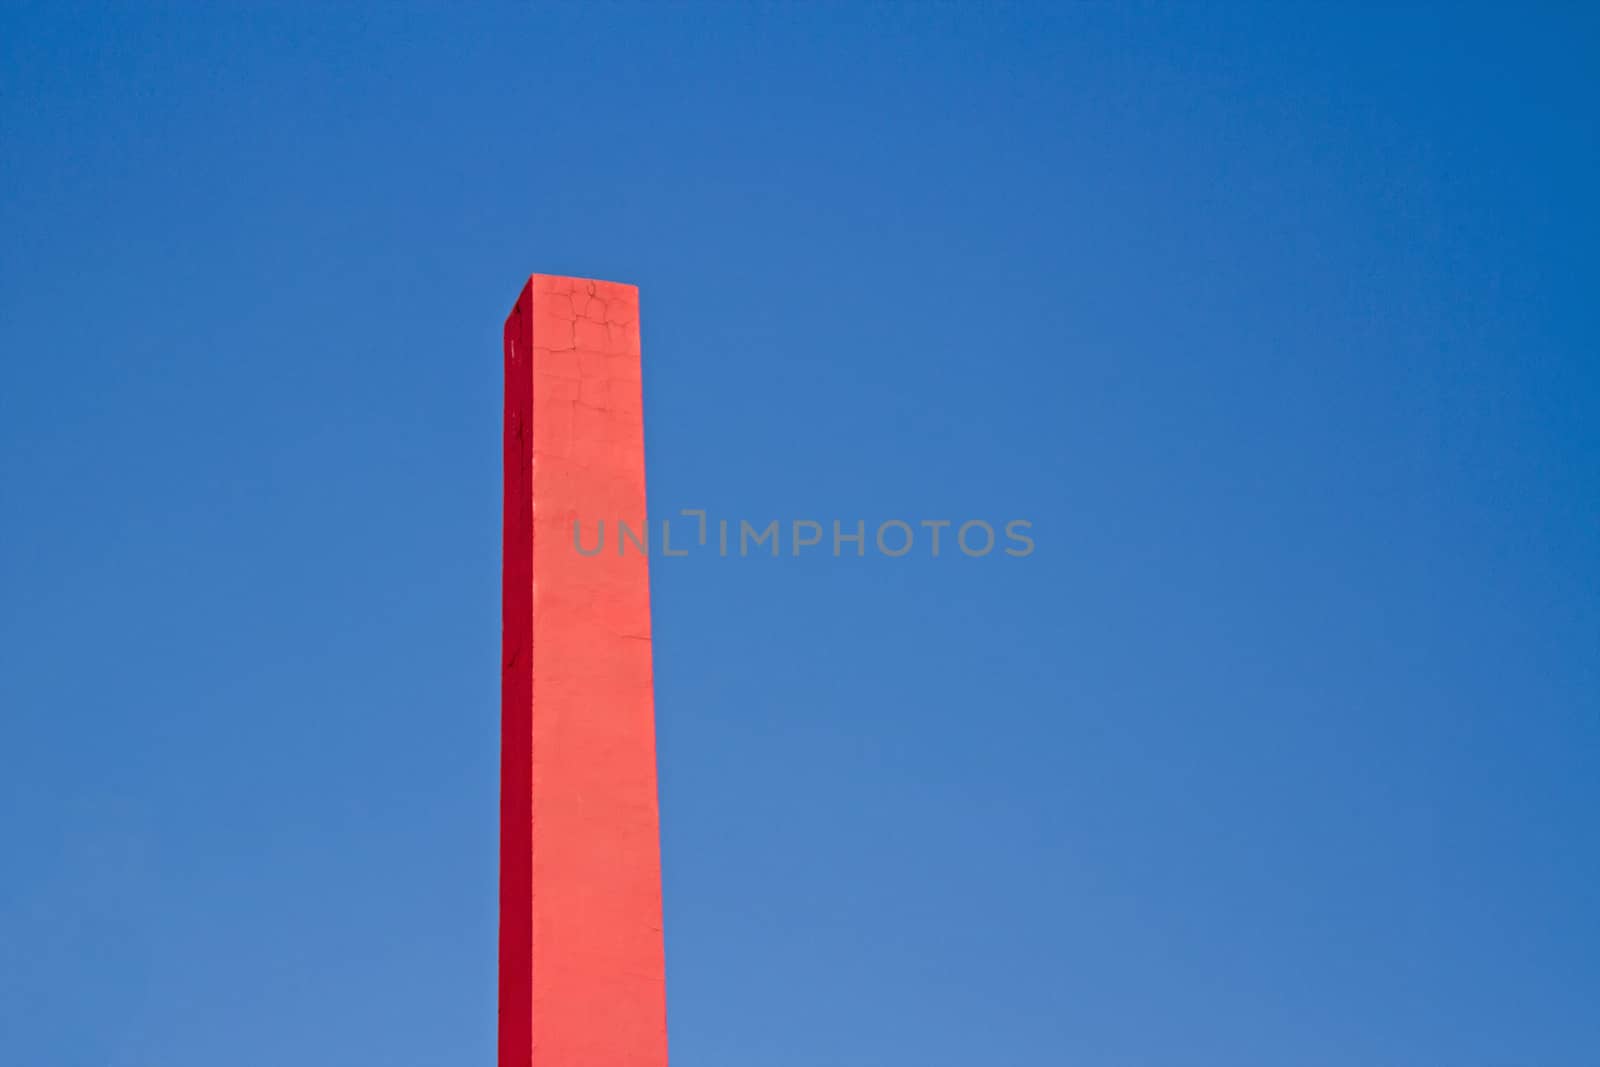 Pink rectangular chimney with blue sky